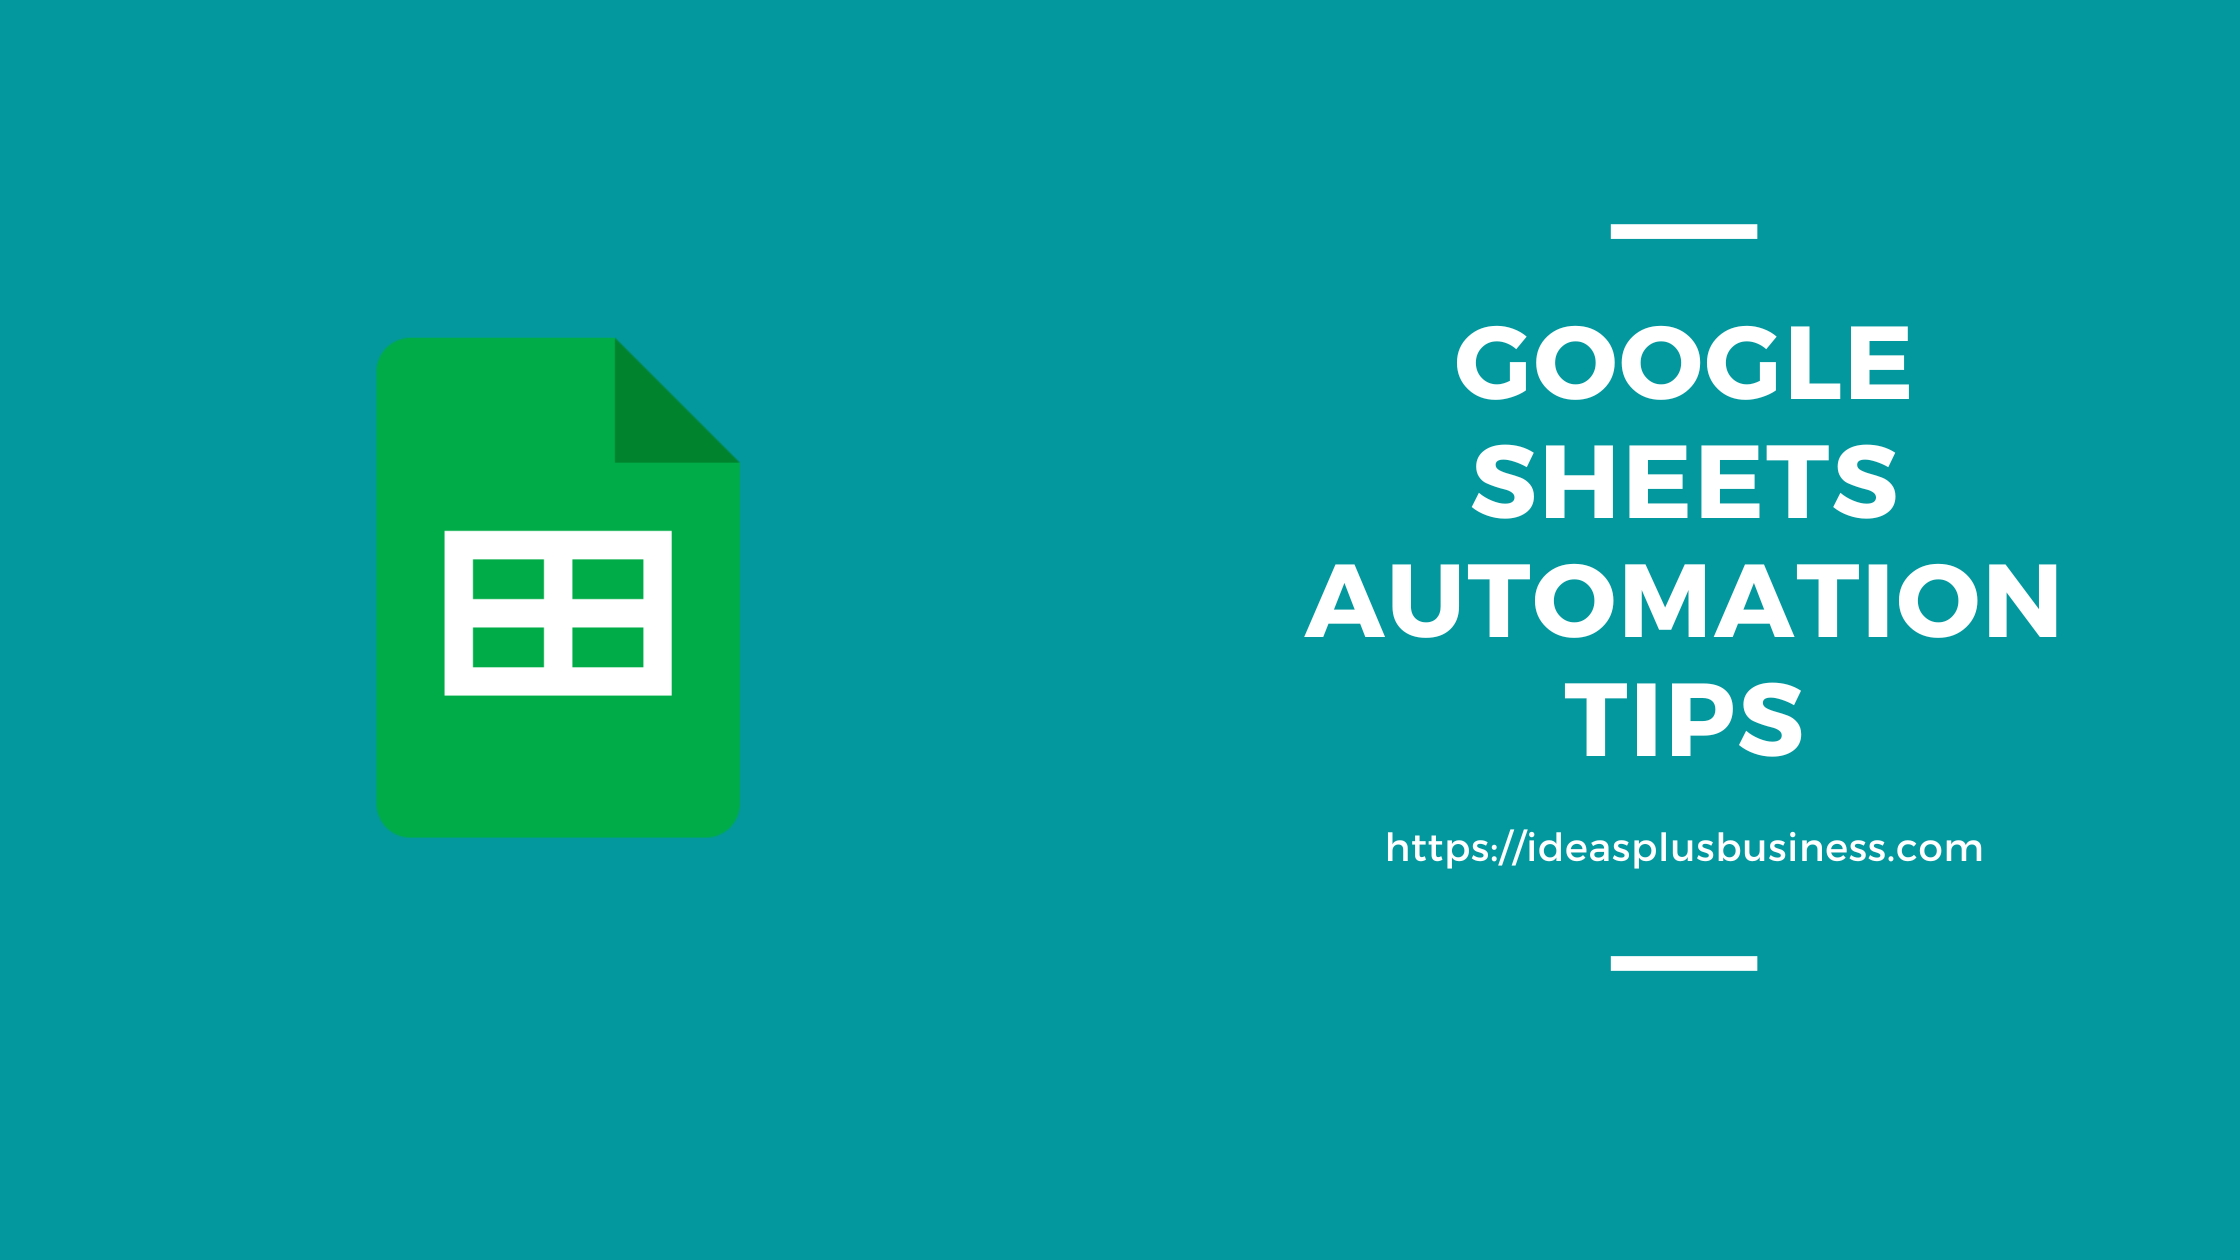 How to Automate Google Sheets? 16 Easy Tips and Tricks